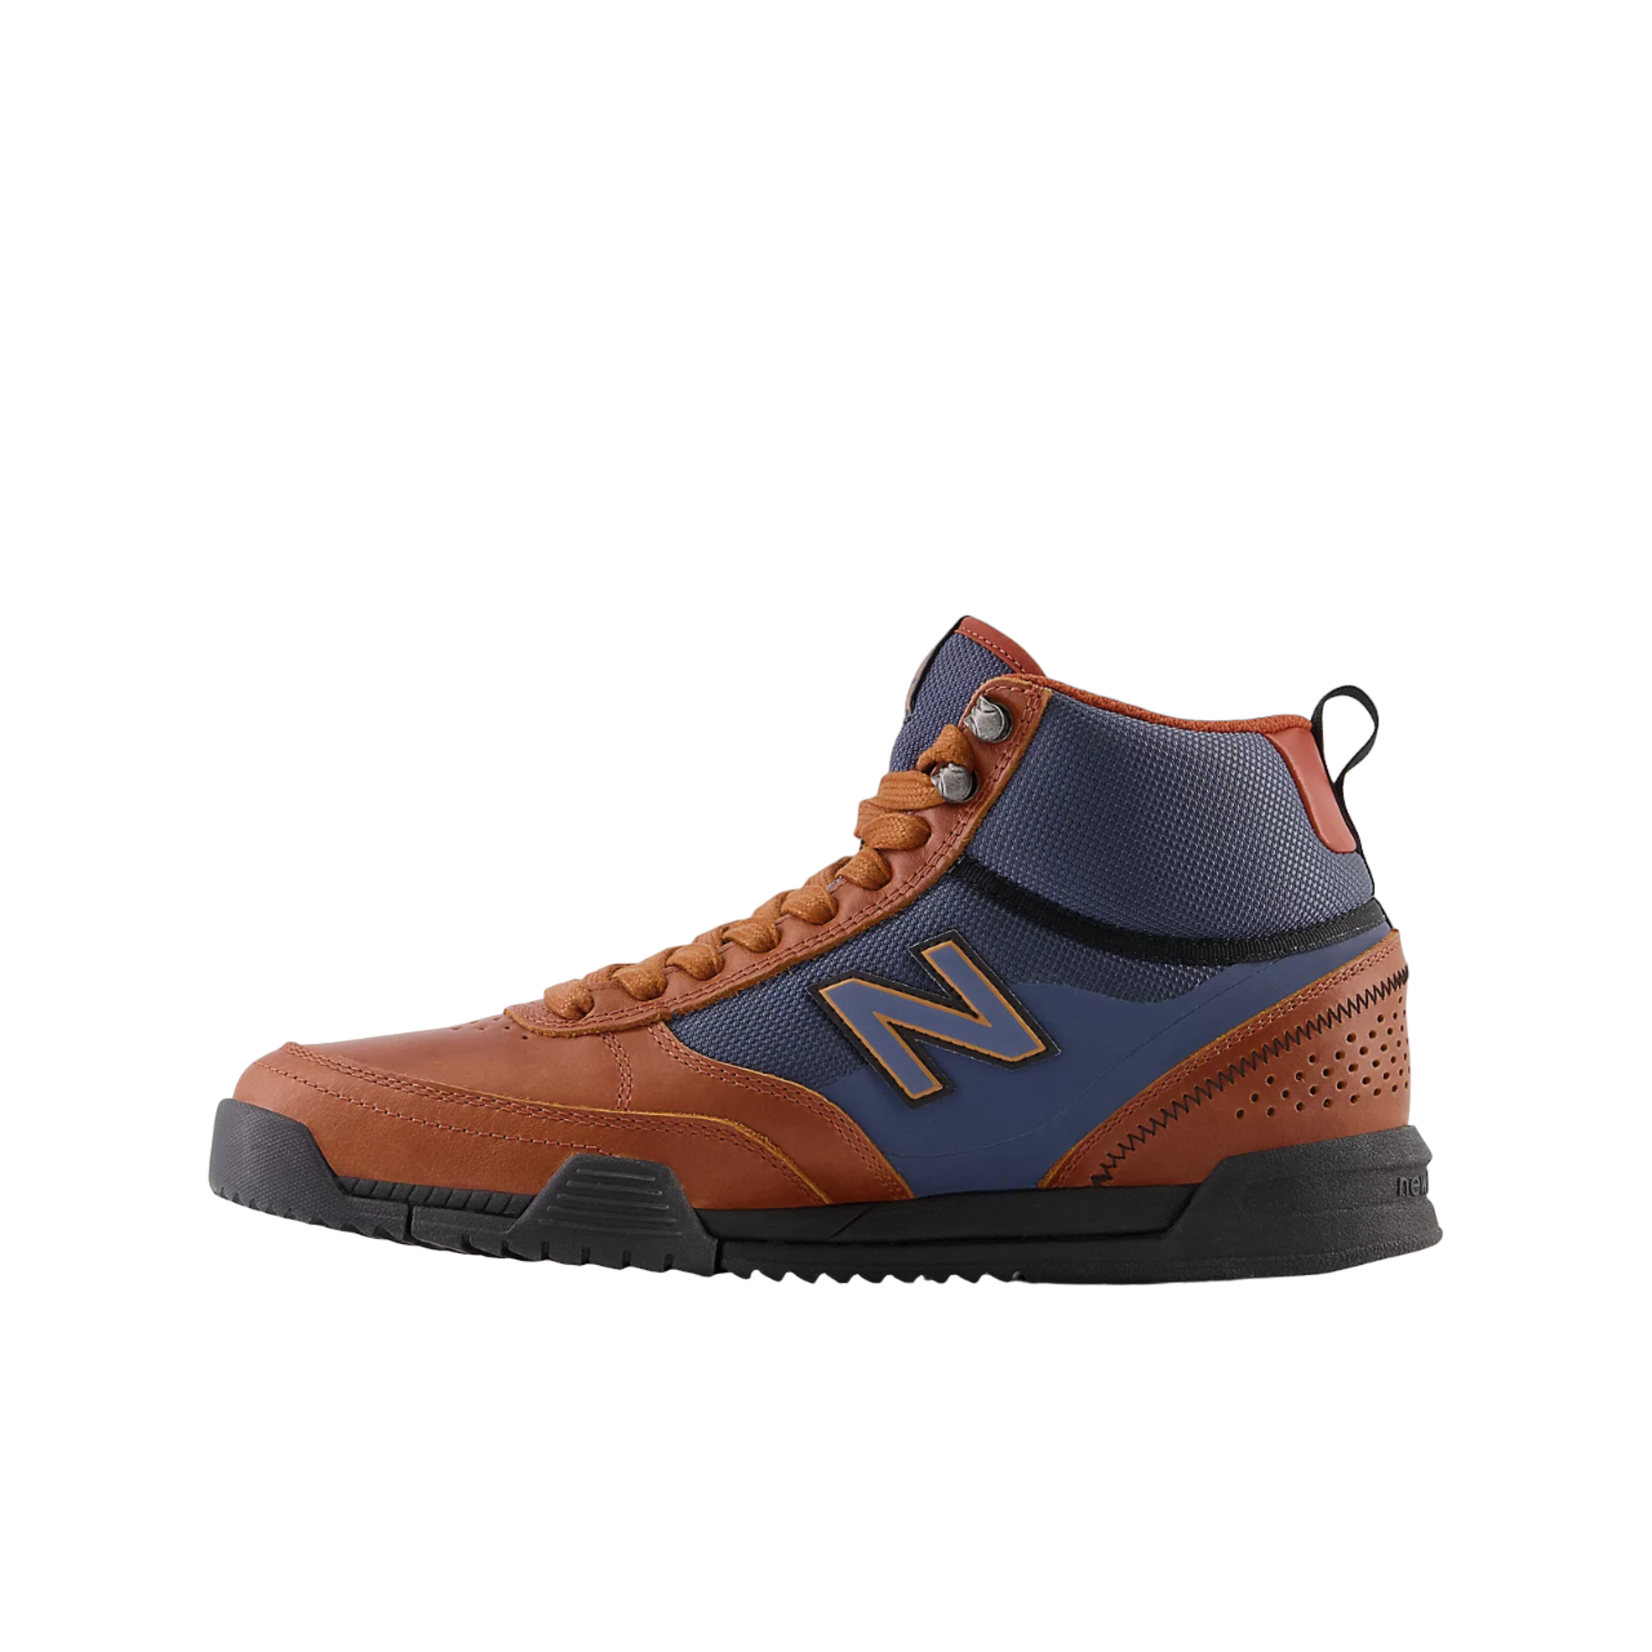 New Balance New Balance Numeric 440 Trail Shoes - Brown/Brown